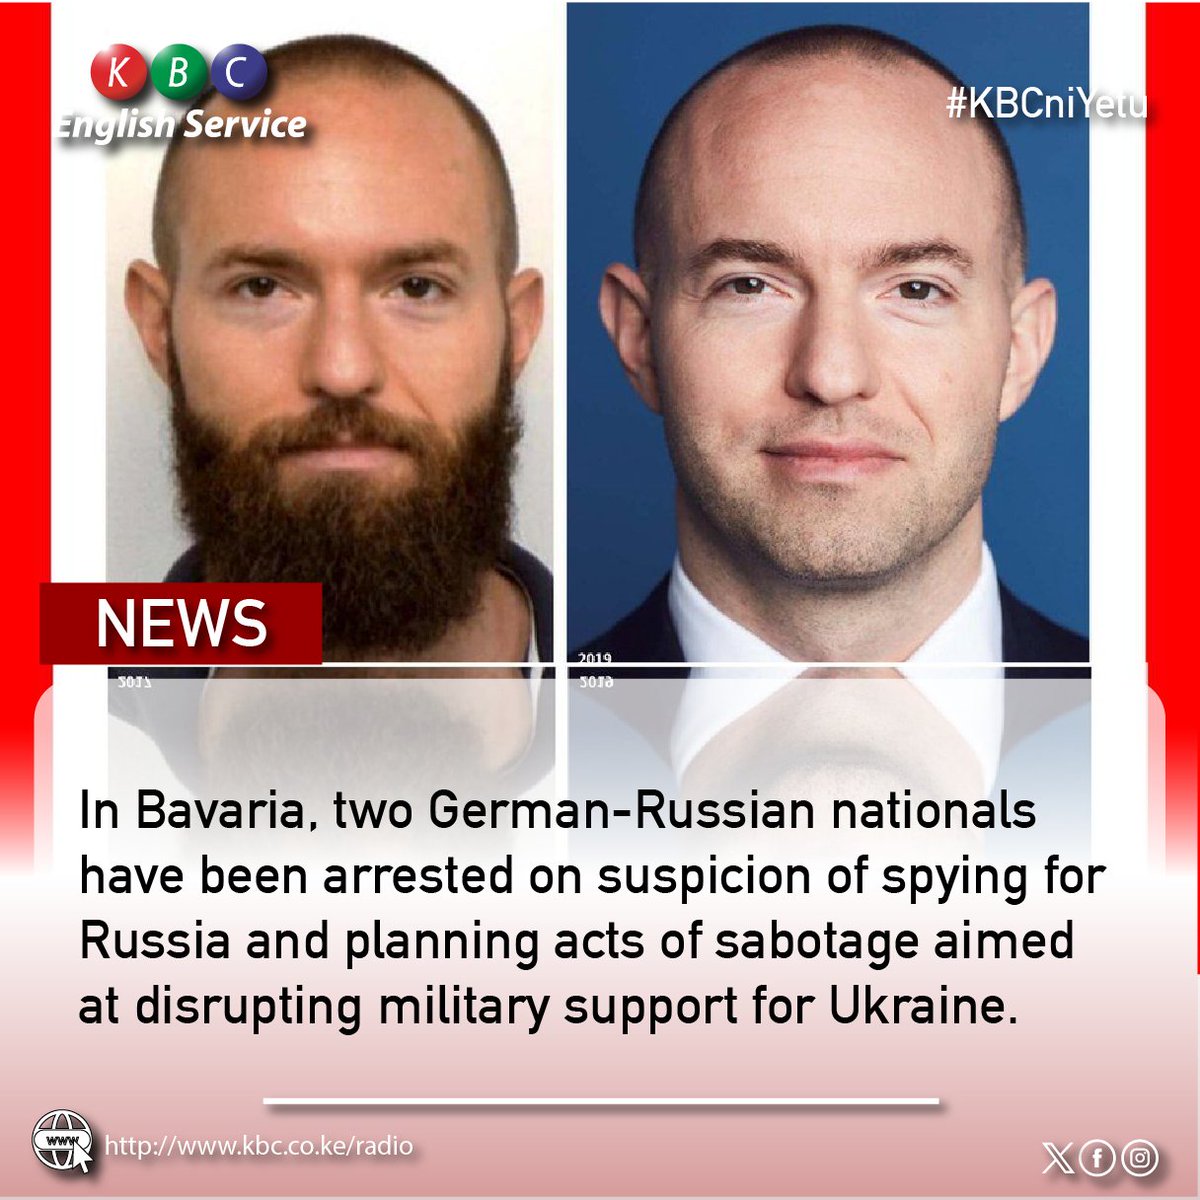 In Bavaria, two German-Russian nationals have been arrested on suspicion of spying for Russia and planning acts of sabotage aimed at disrupting military support for Ukraine. ^PMN #KBCEnglishService